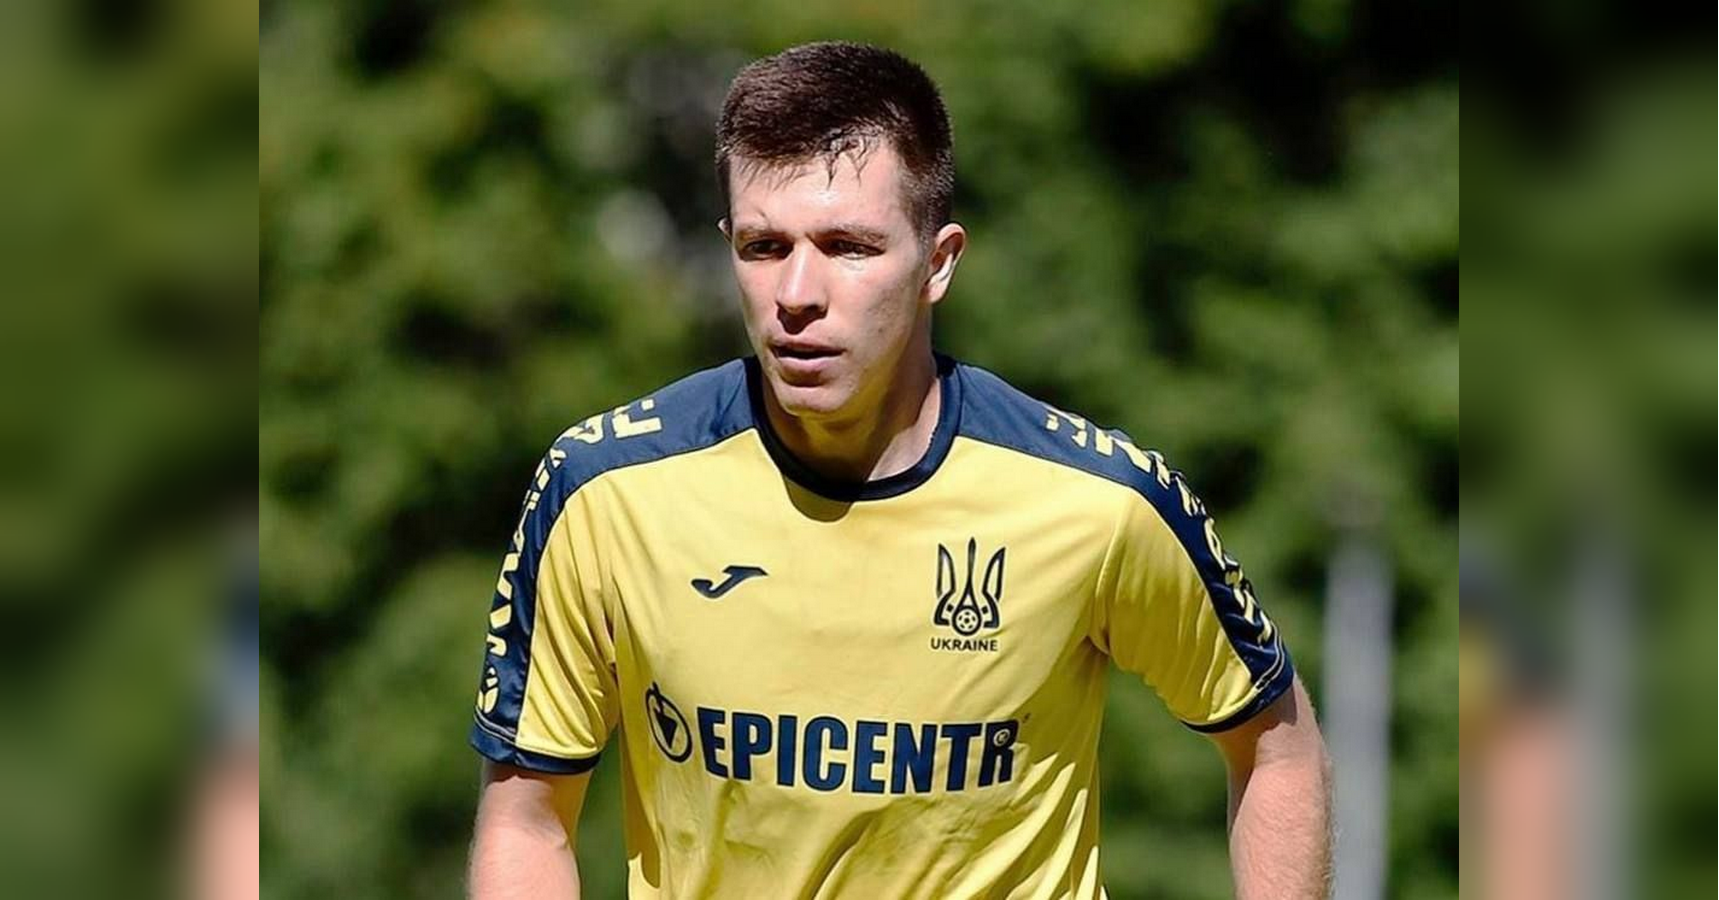 Former Shakhtar participant Oleksandr Pikhalyonok signed a contract with Dynamo for five years